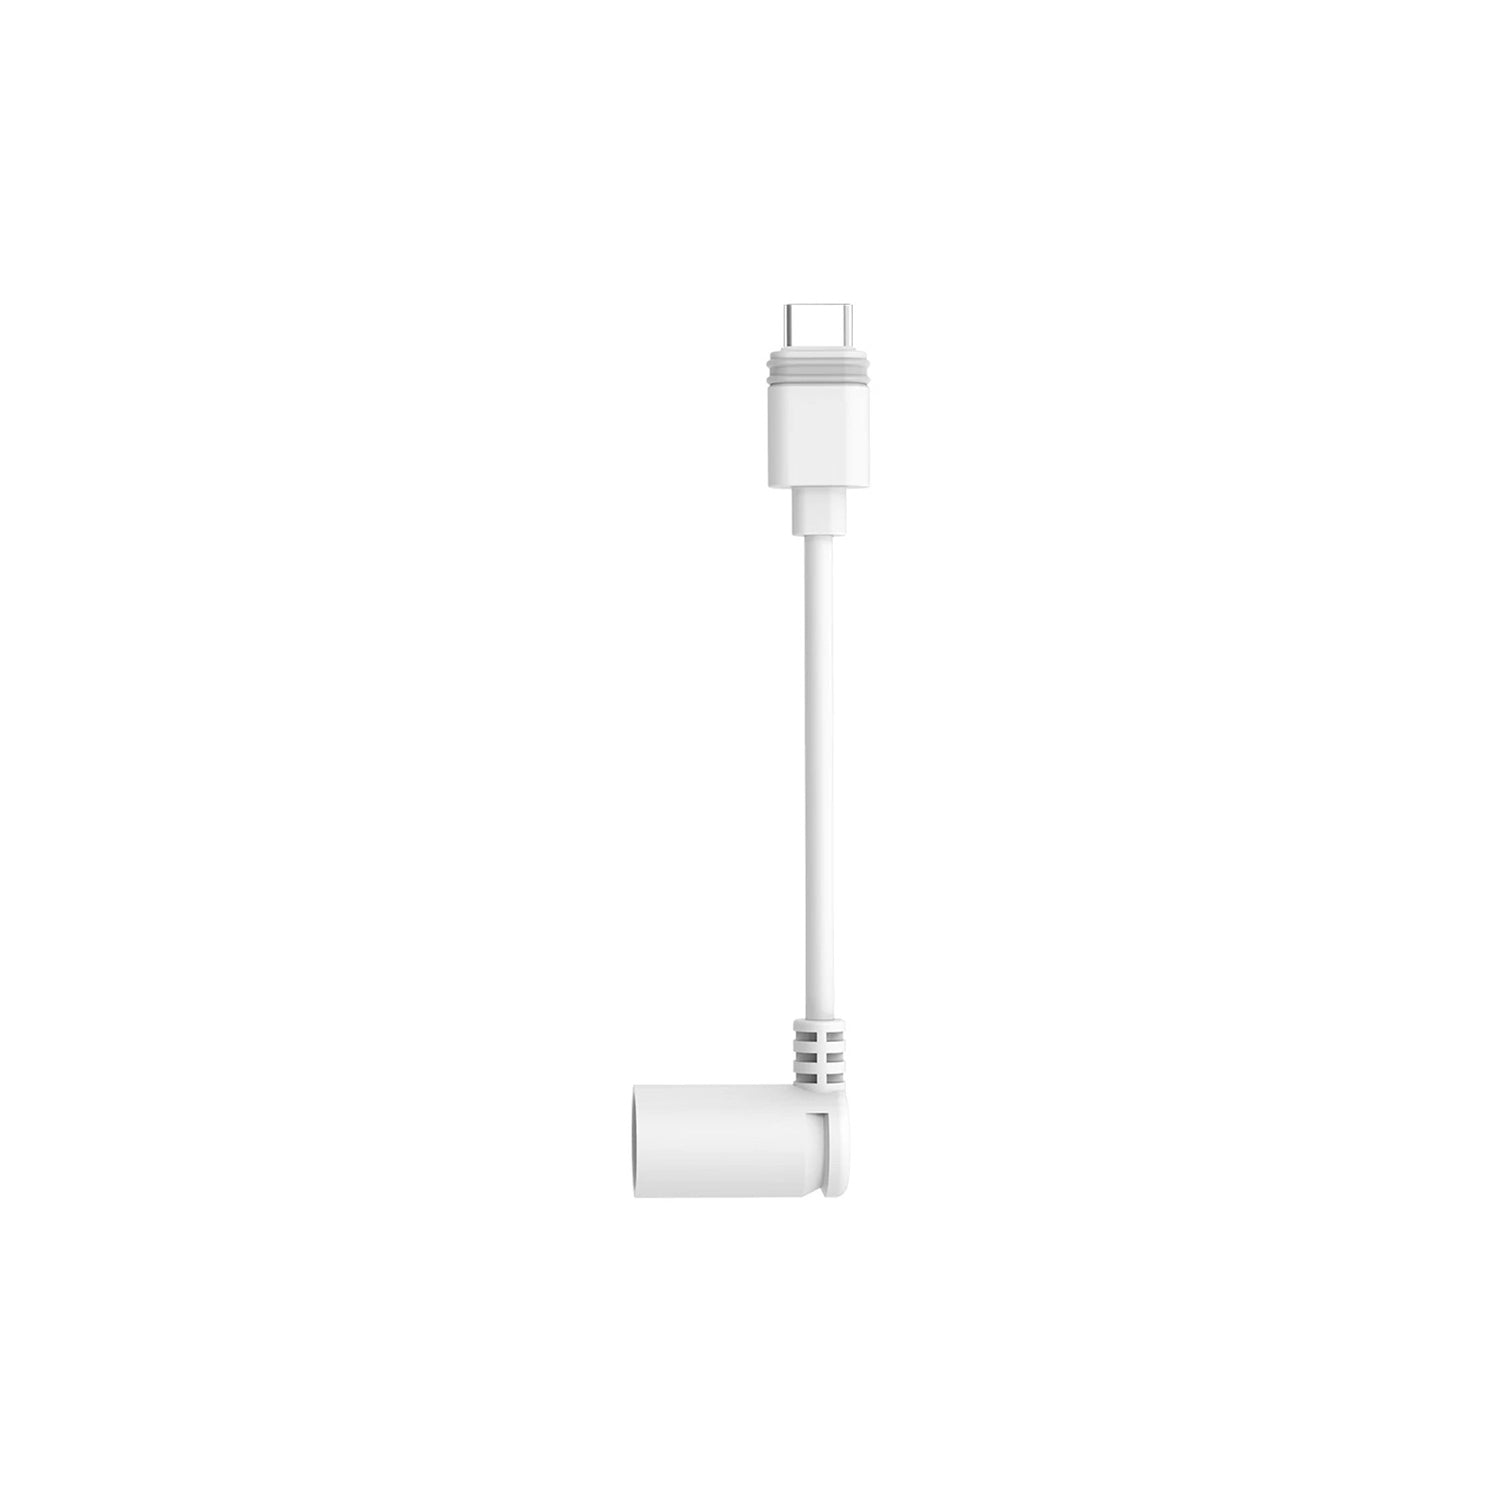 Barrel Plug to USB-C Adapter (for Barrel Plug Solar Panels and USB-C Security Cams) - White